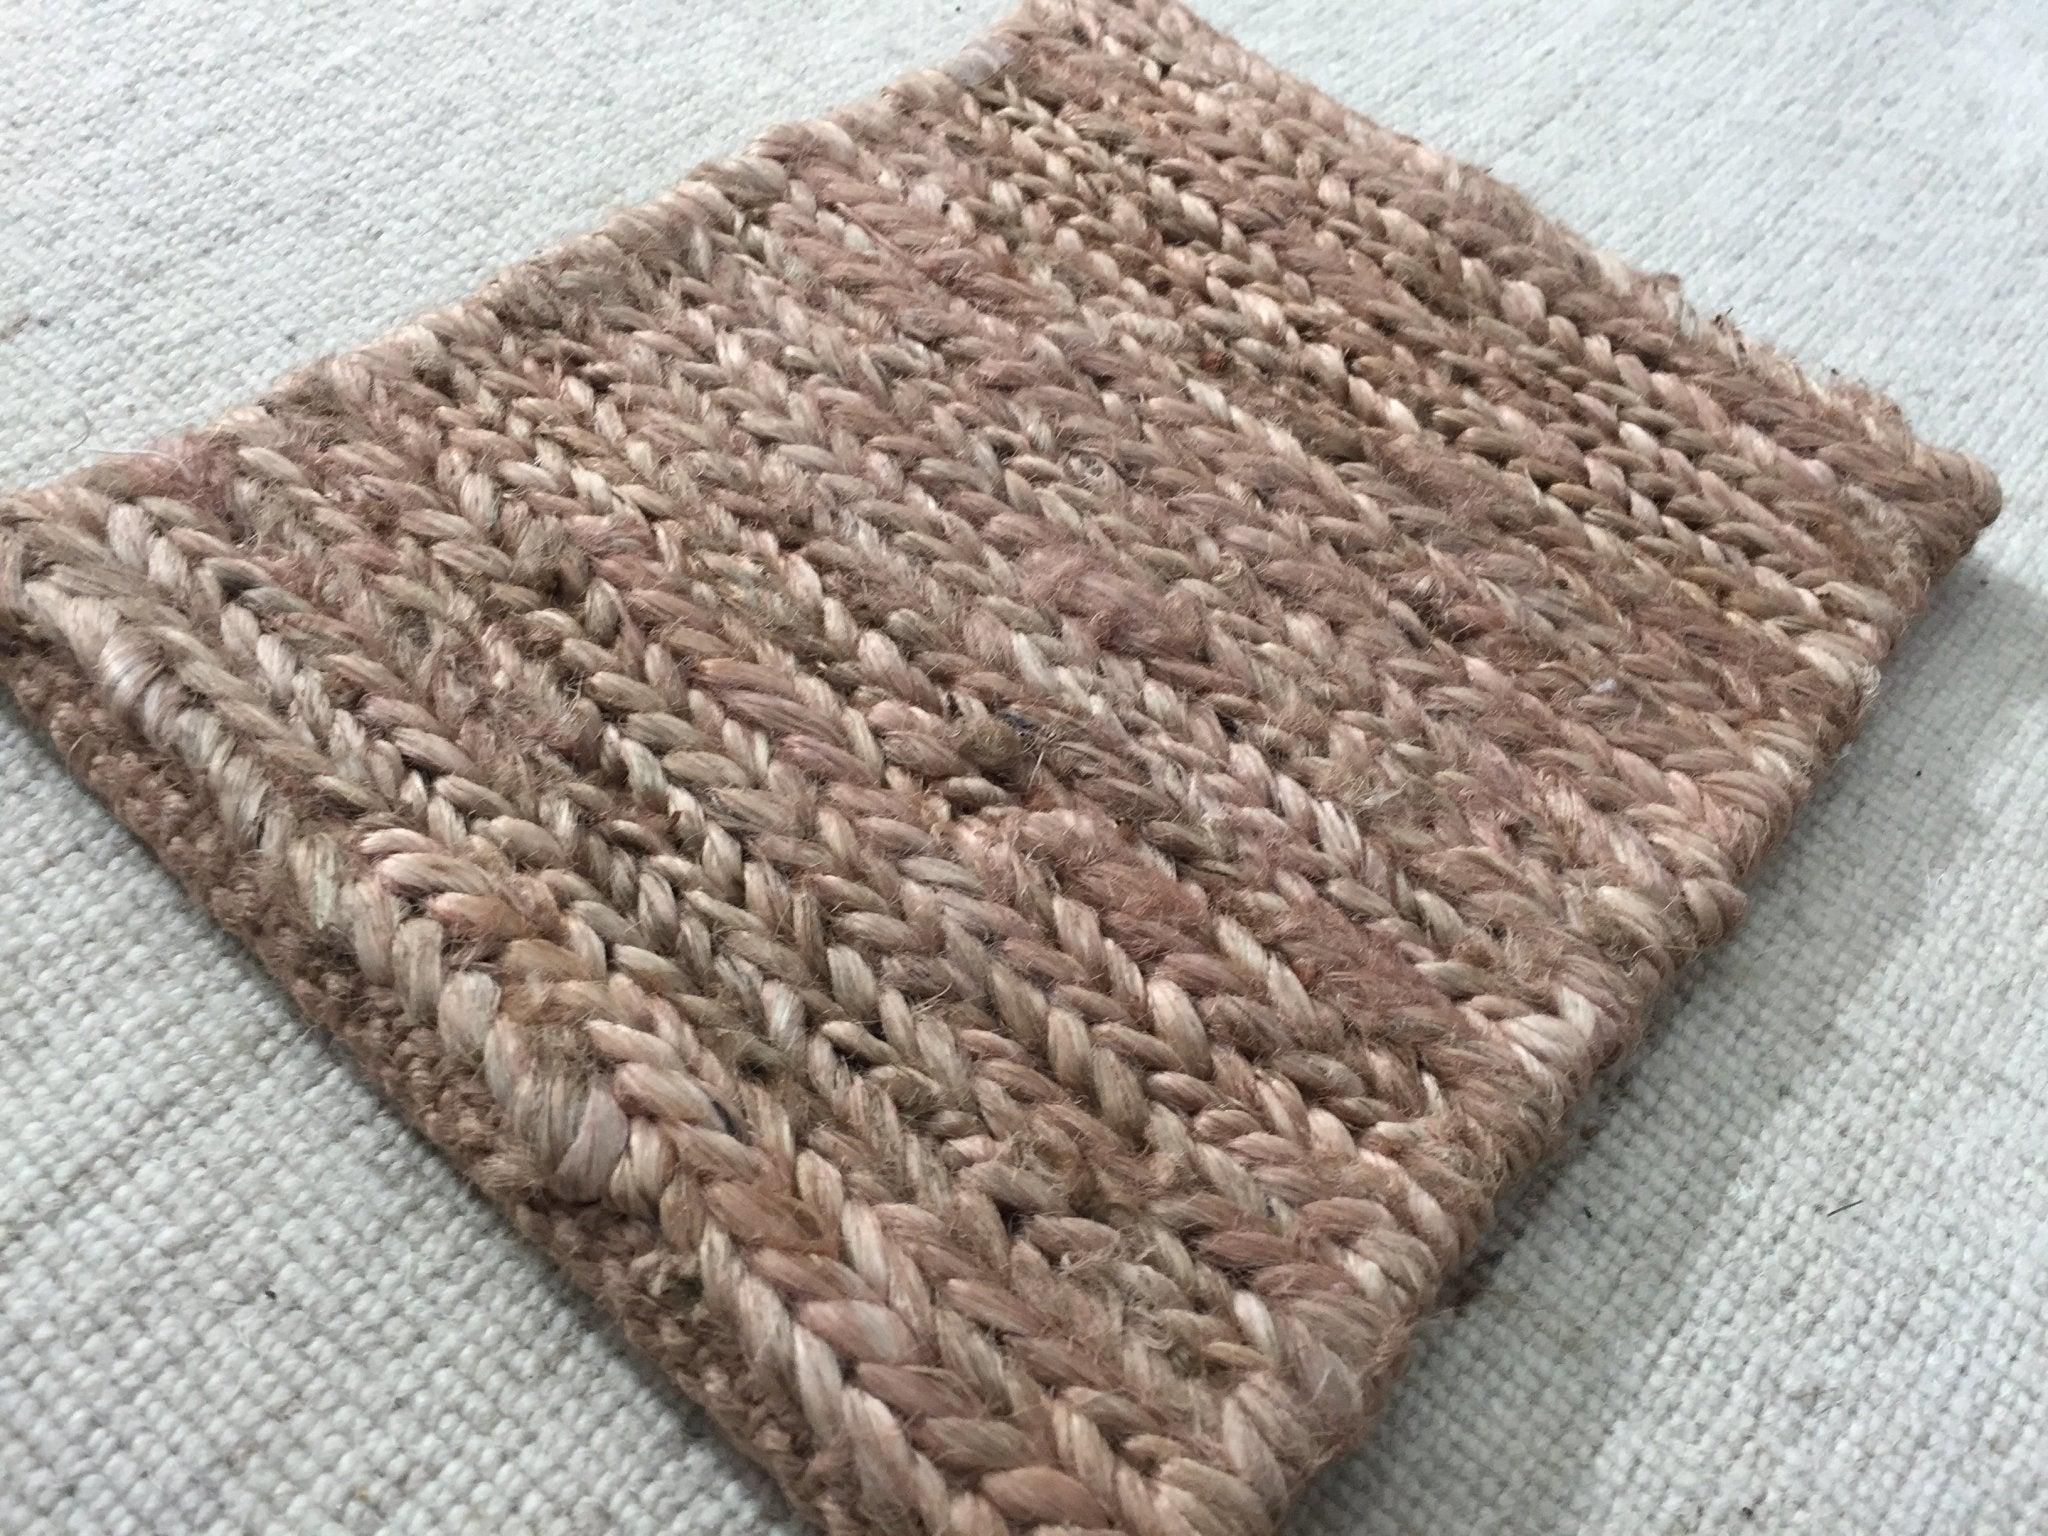 Jute By the People For the People in 7 More Colors | Banana Manor Rug Company